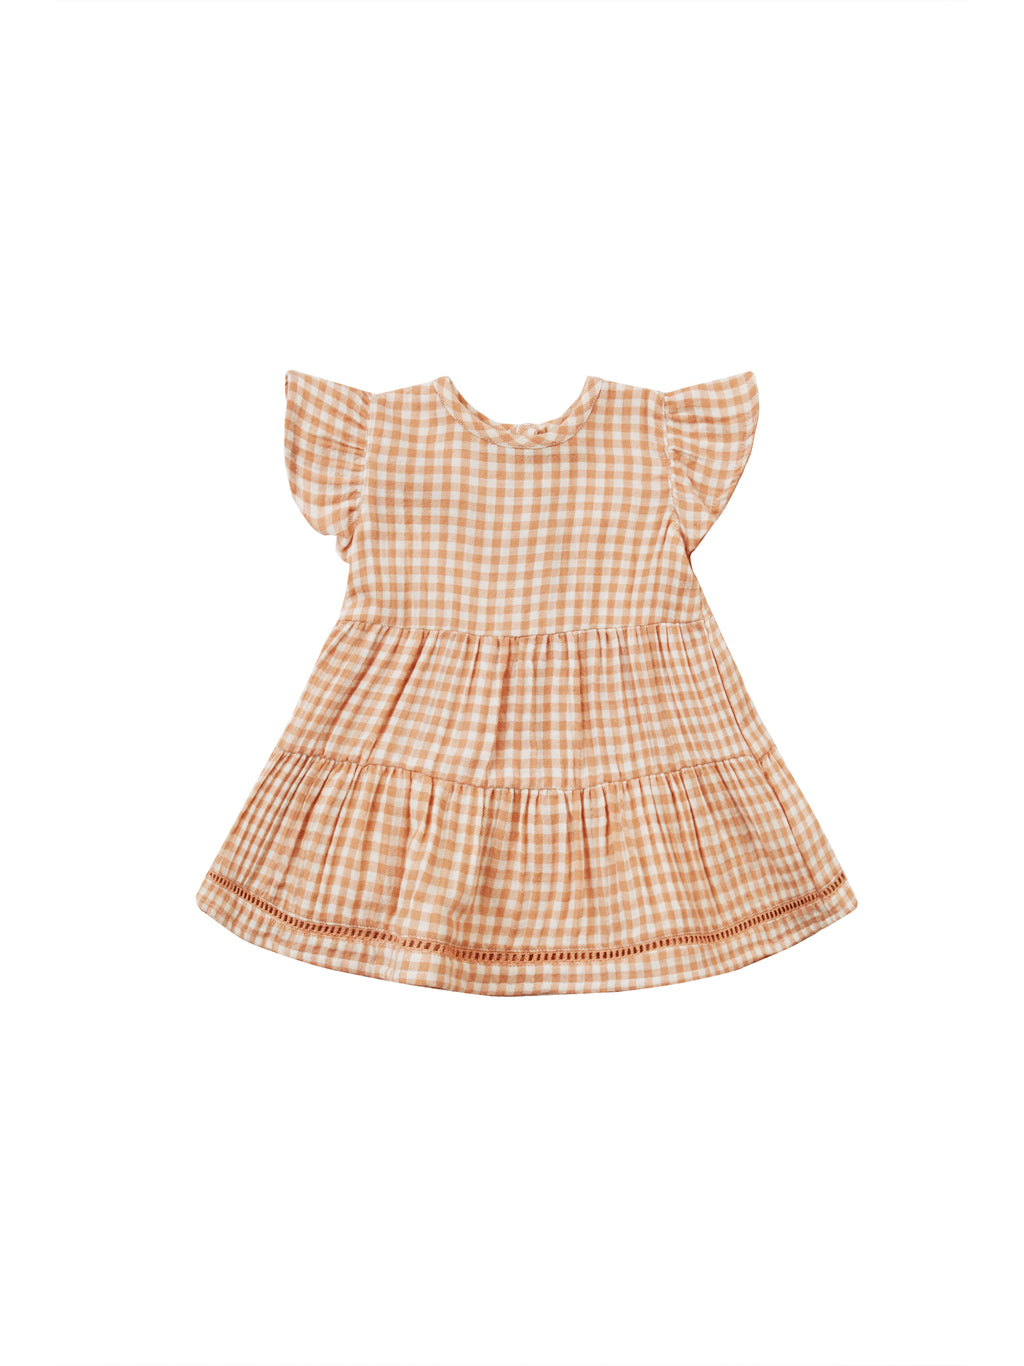 Quincy Mae Lily Dress - Melon Gingham